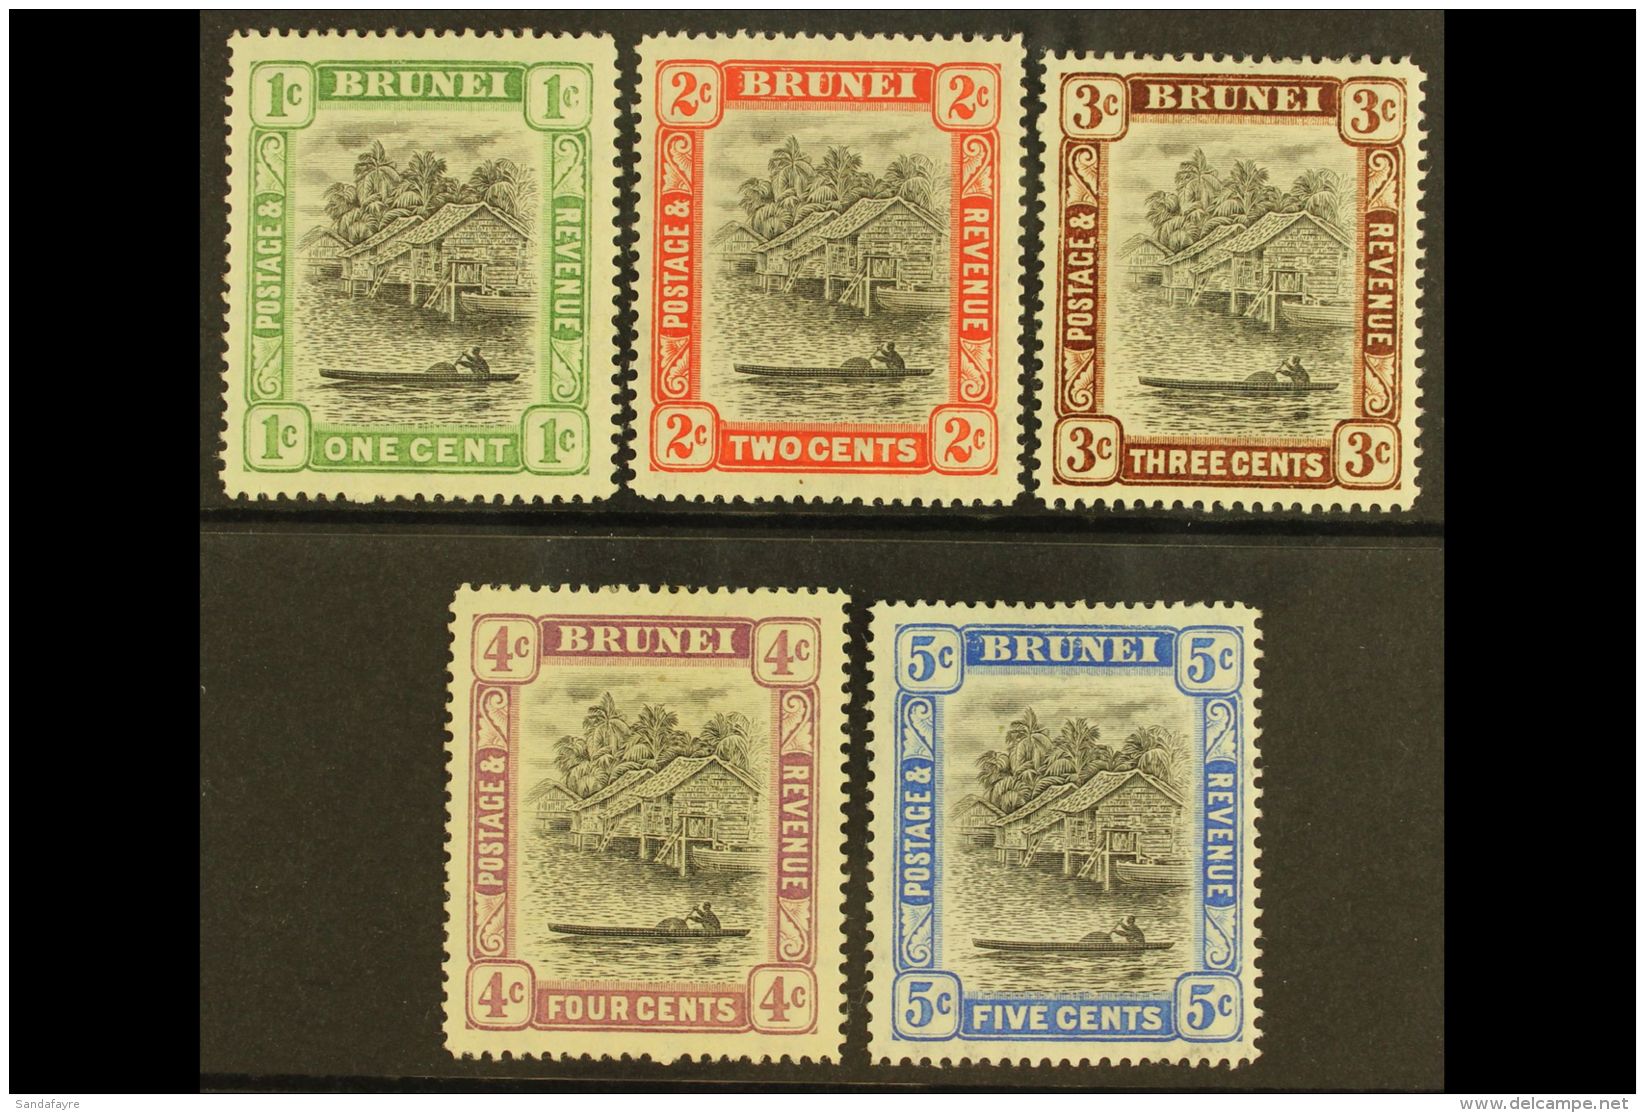 1907 1c - 5c River View All With Variety "wmk Reversed", SG 23x/27x, Very Fine Mint. (4 Stamps) For More Images,... - Brunei (...-1984)